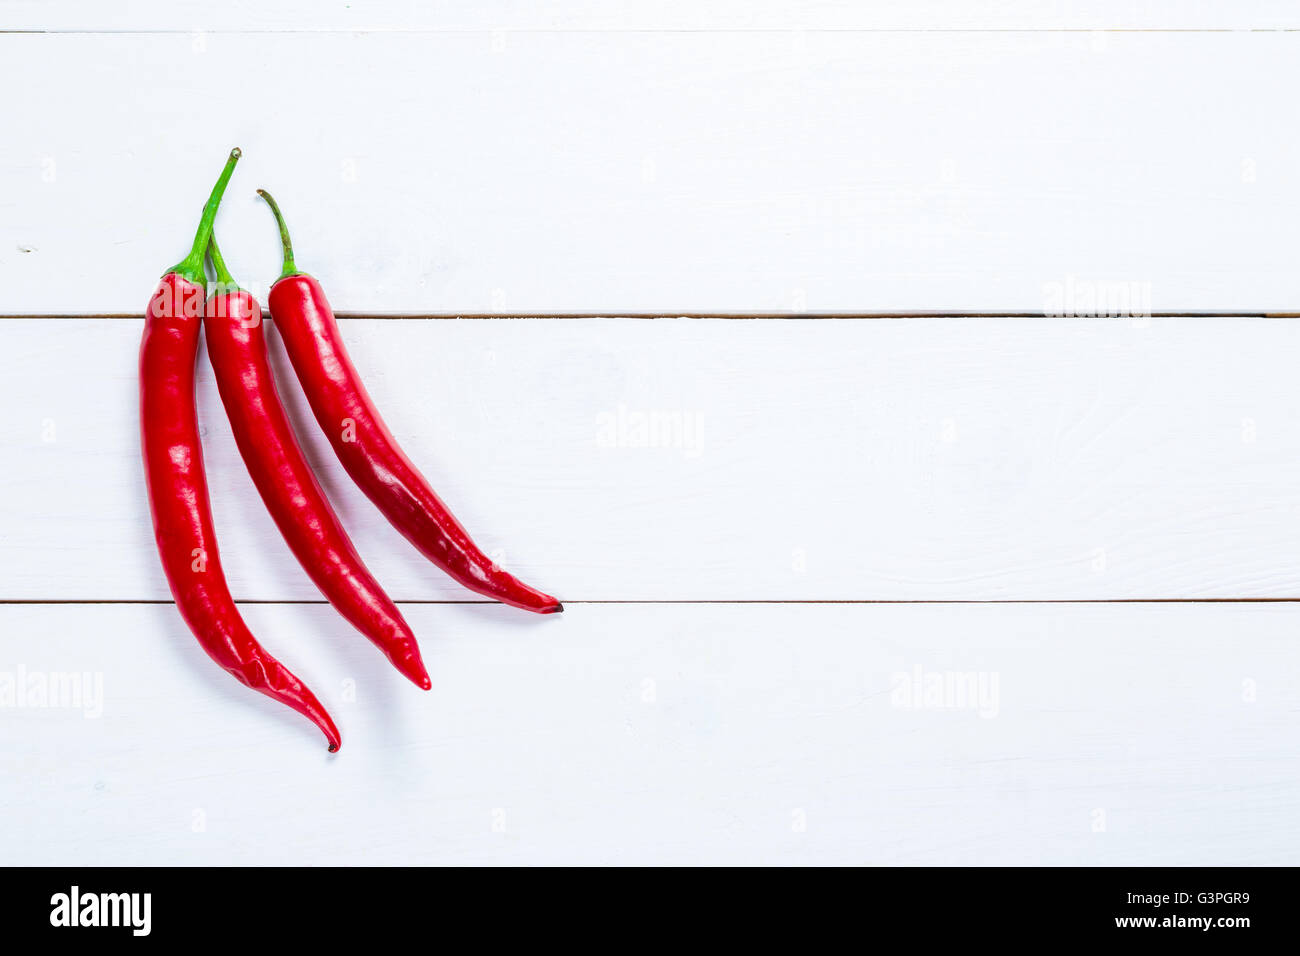 Beautiful background Group of three chili peppers  on the white boards with free space for you text Stock Photo